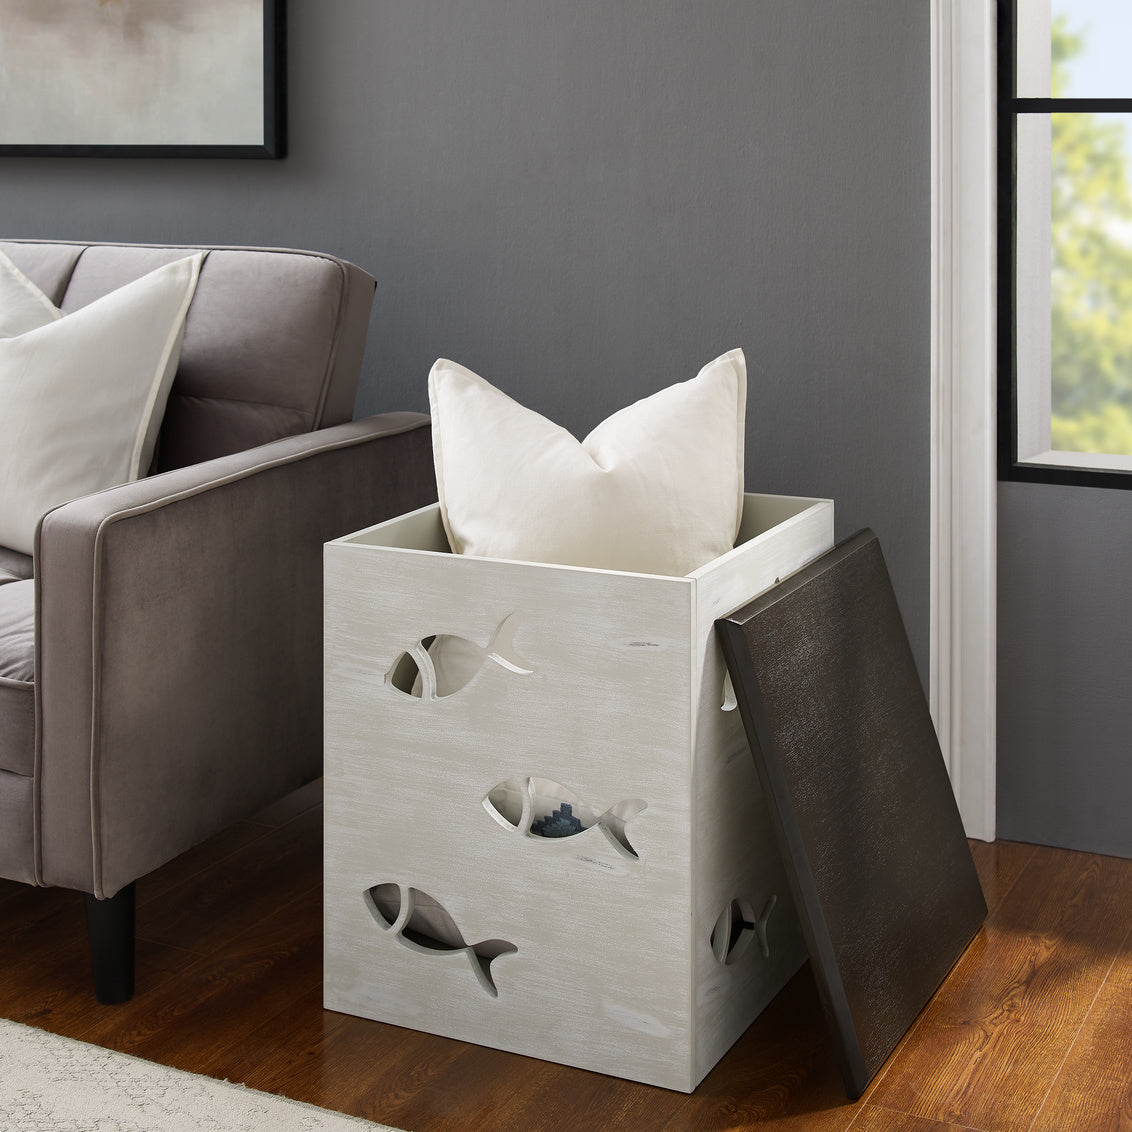 Goldie Cream Fish Side Table with Storage